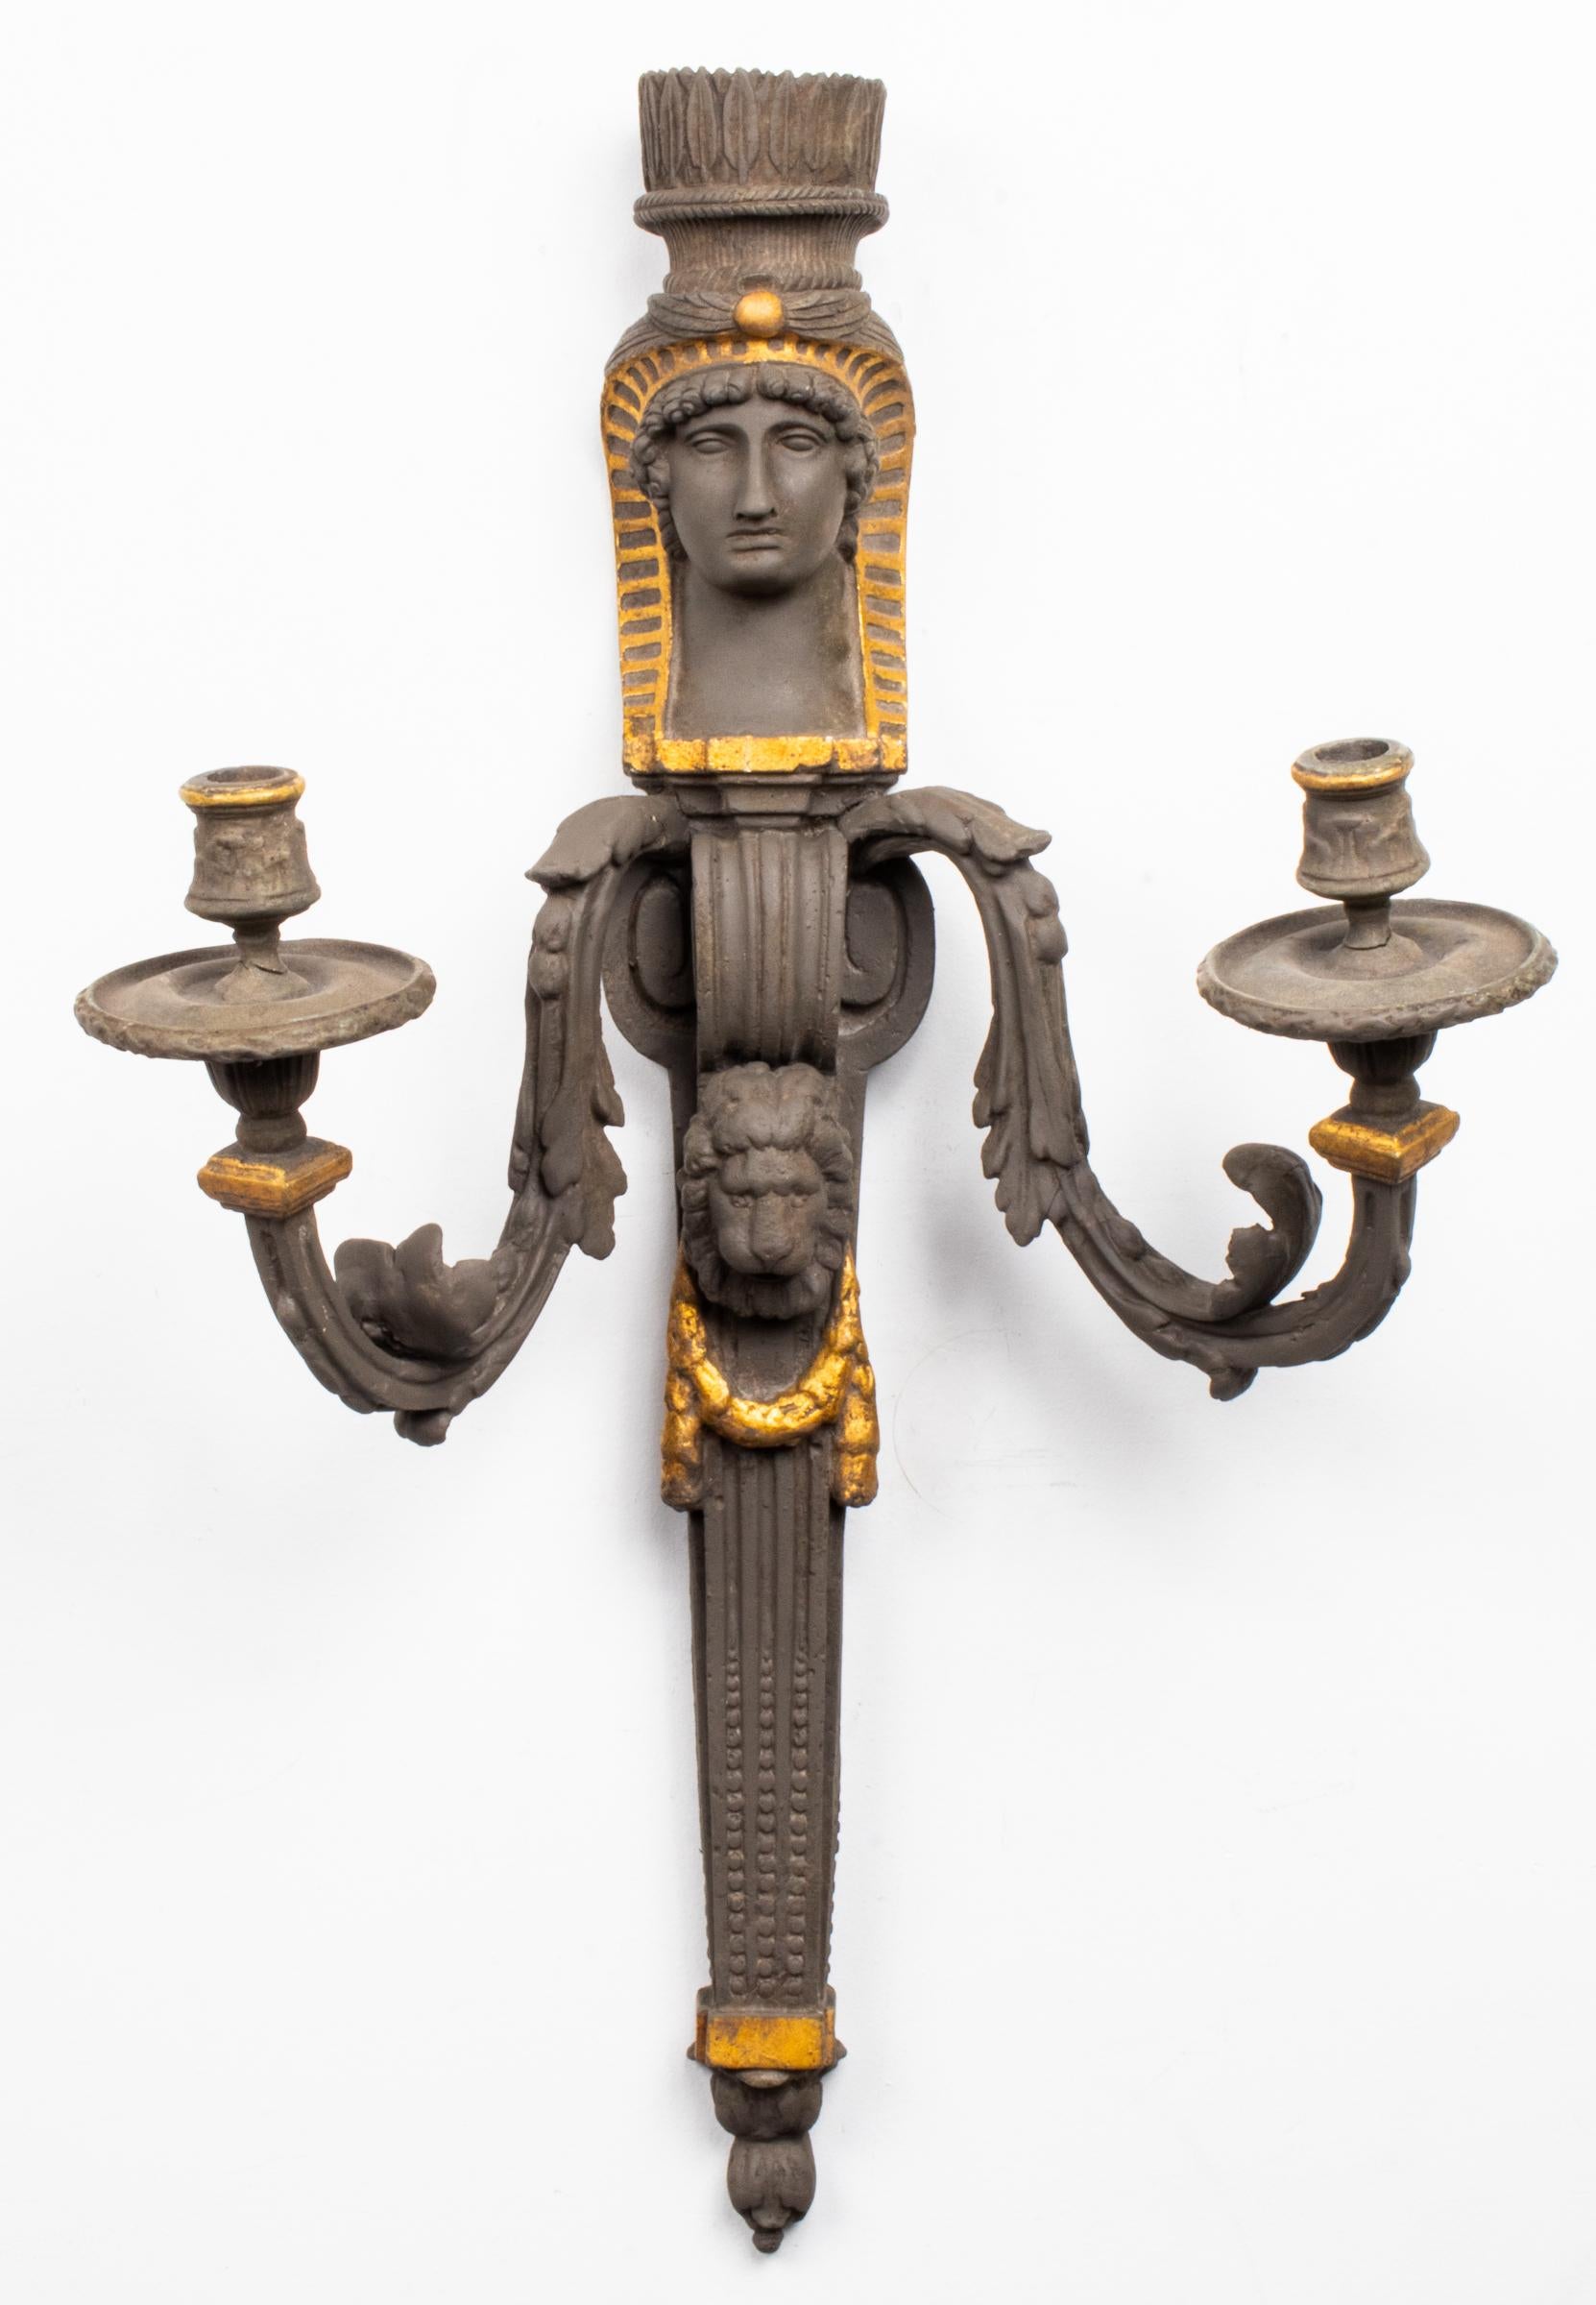 Large pair of Egyptian Revival manner two-light sconces, 20th century, overall paint and gilt decorated, the figures with elaborate headdresses above two scrolling arms flanking a lion mask on the tapered columns. Measures: 30.5” H x 18” W x 10” D.